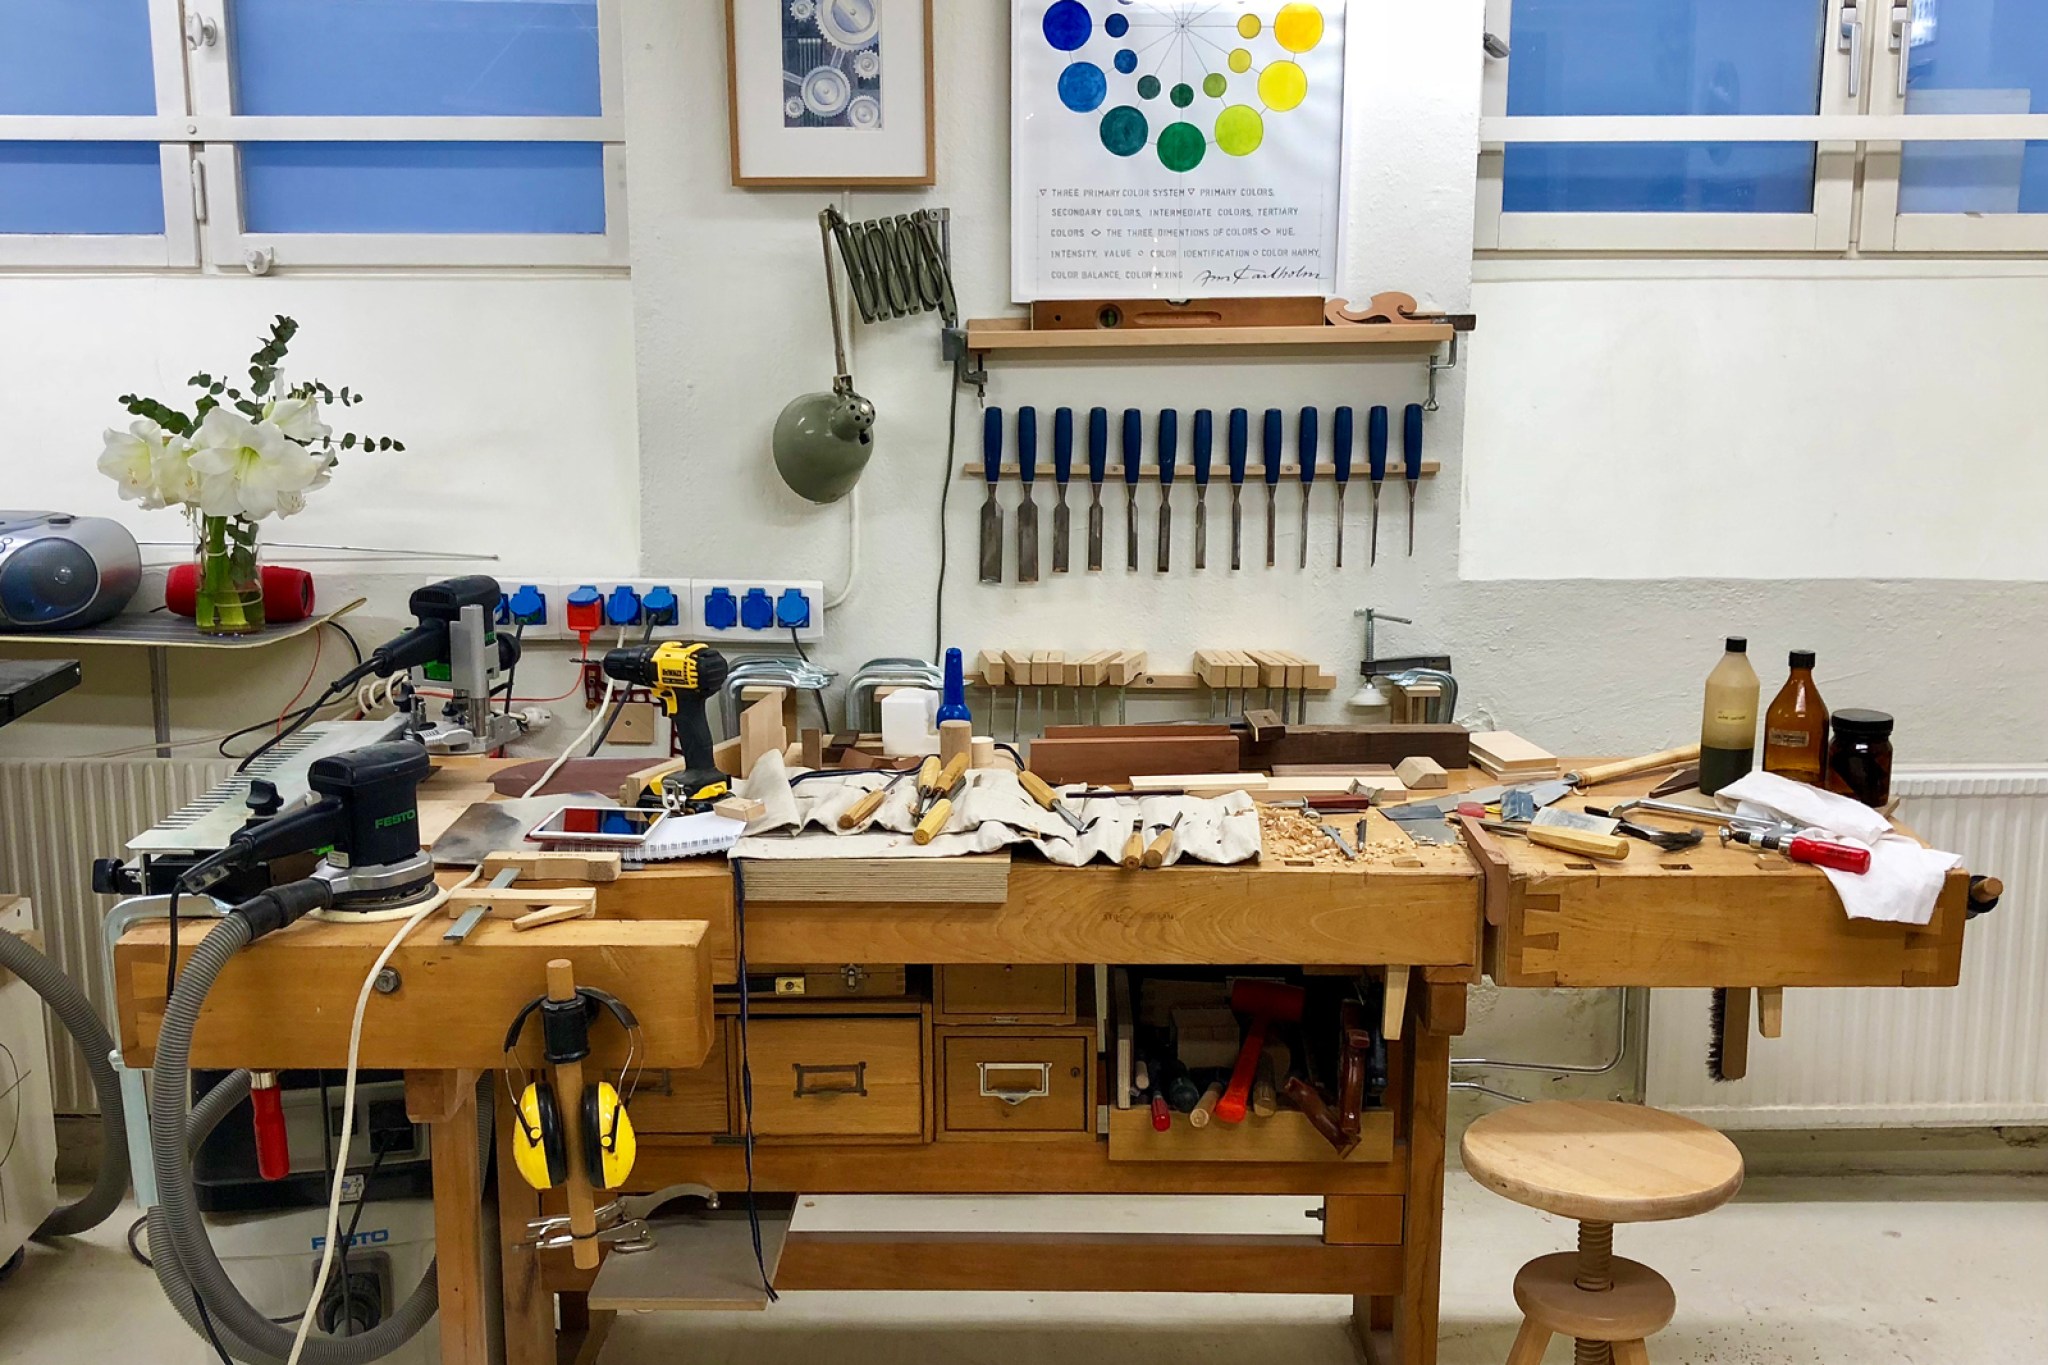 A messy wood work bench in a basement